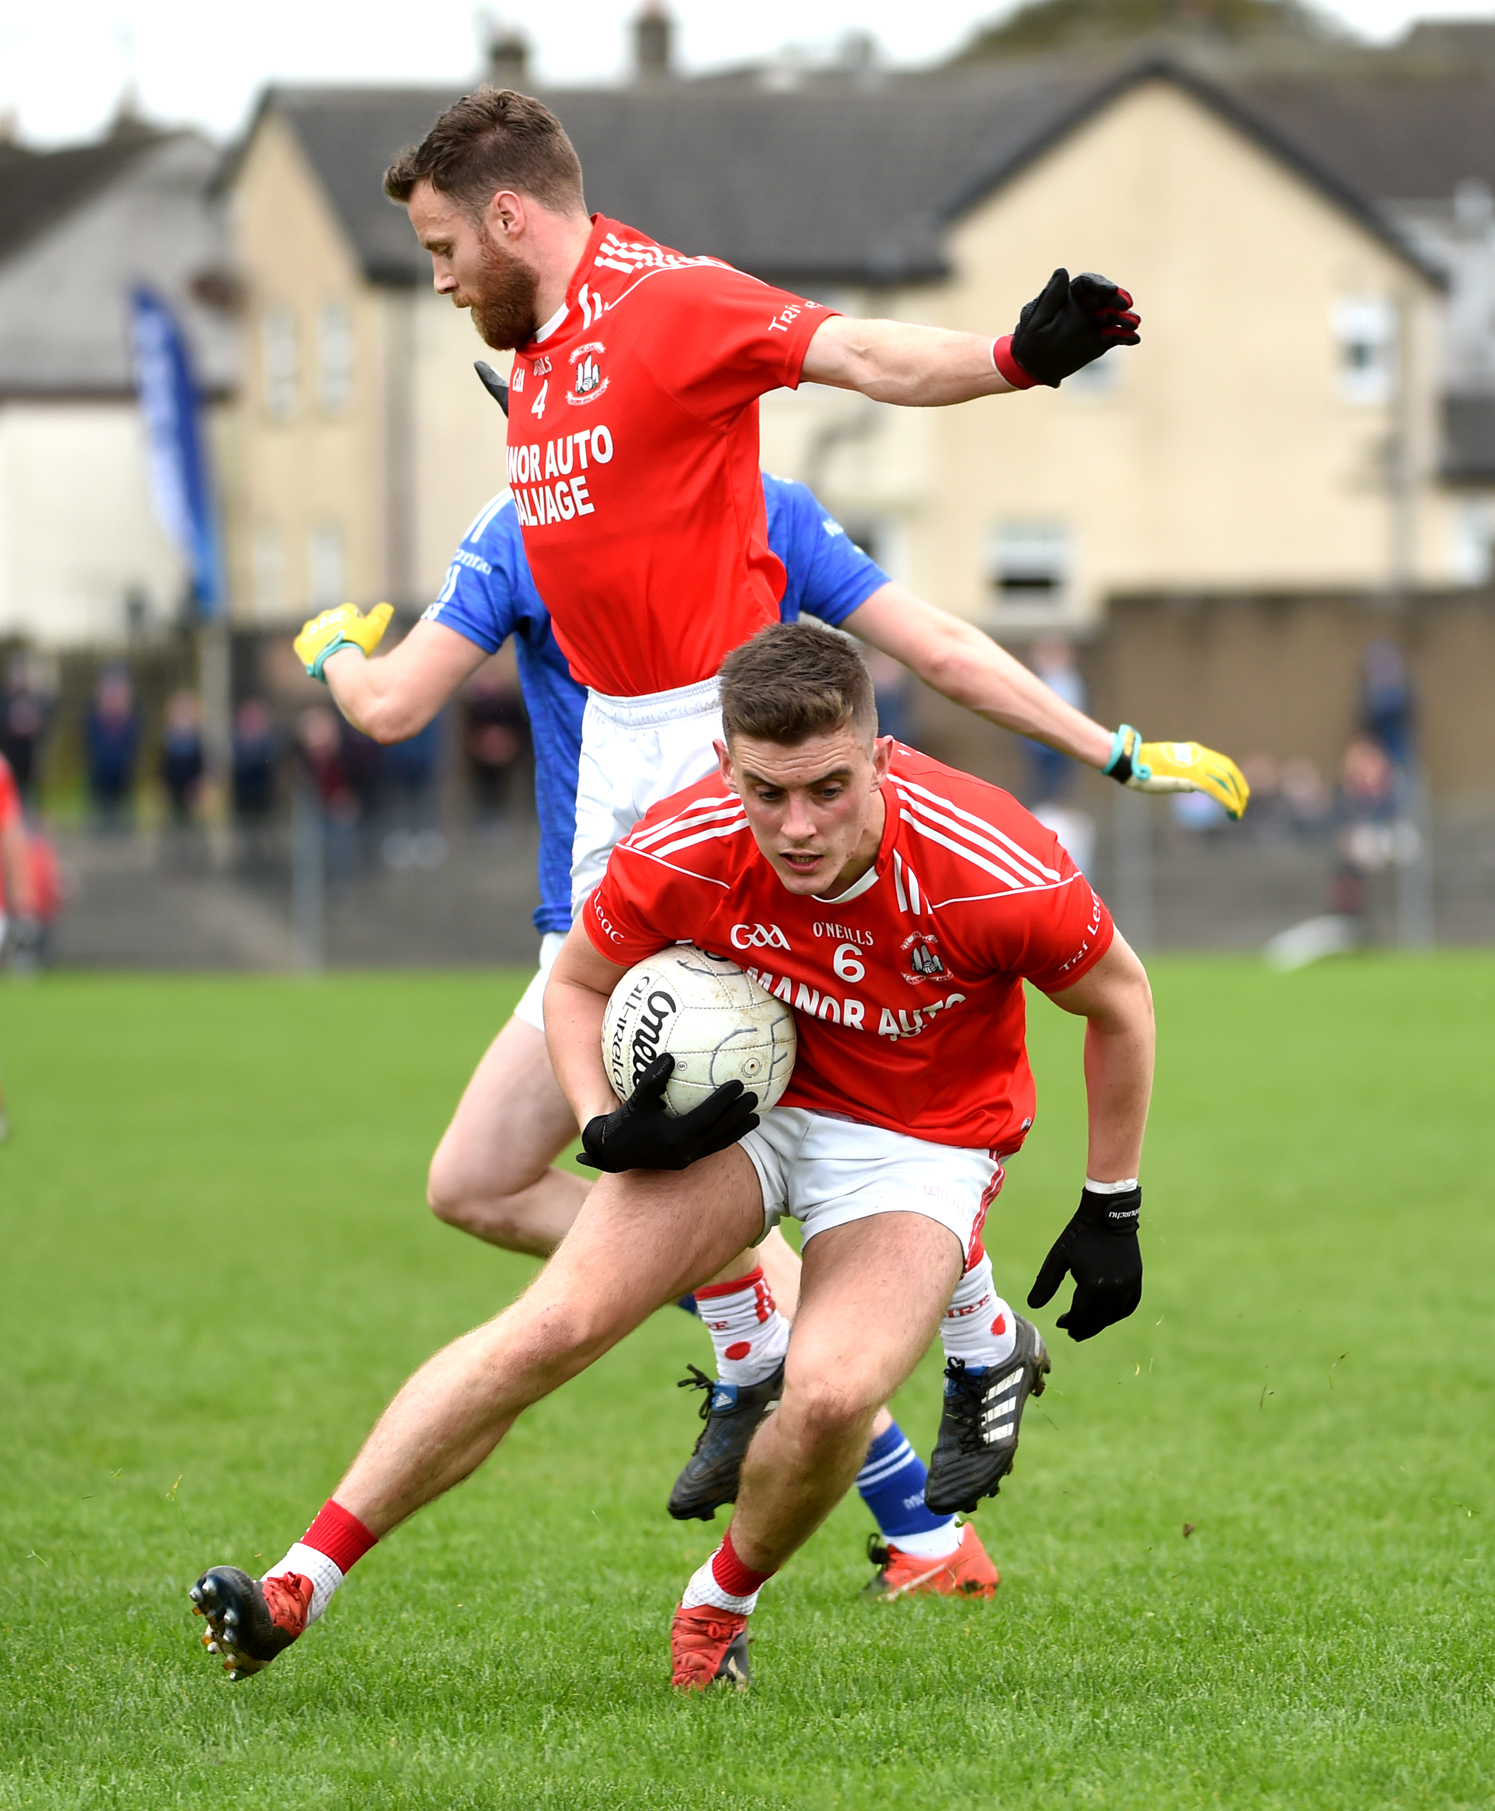 Tyrone clubs presented with fixture options